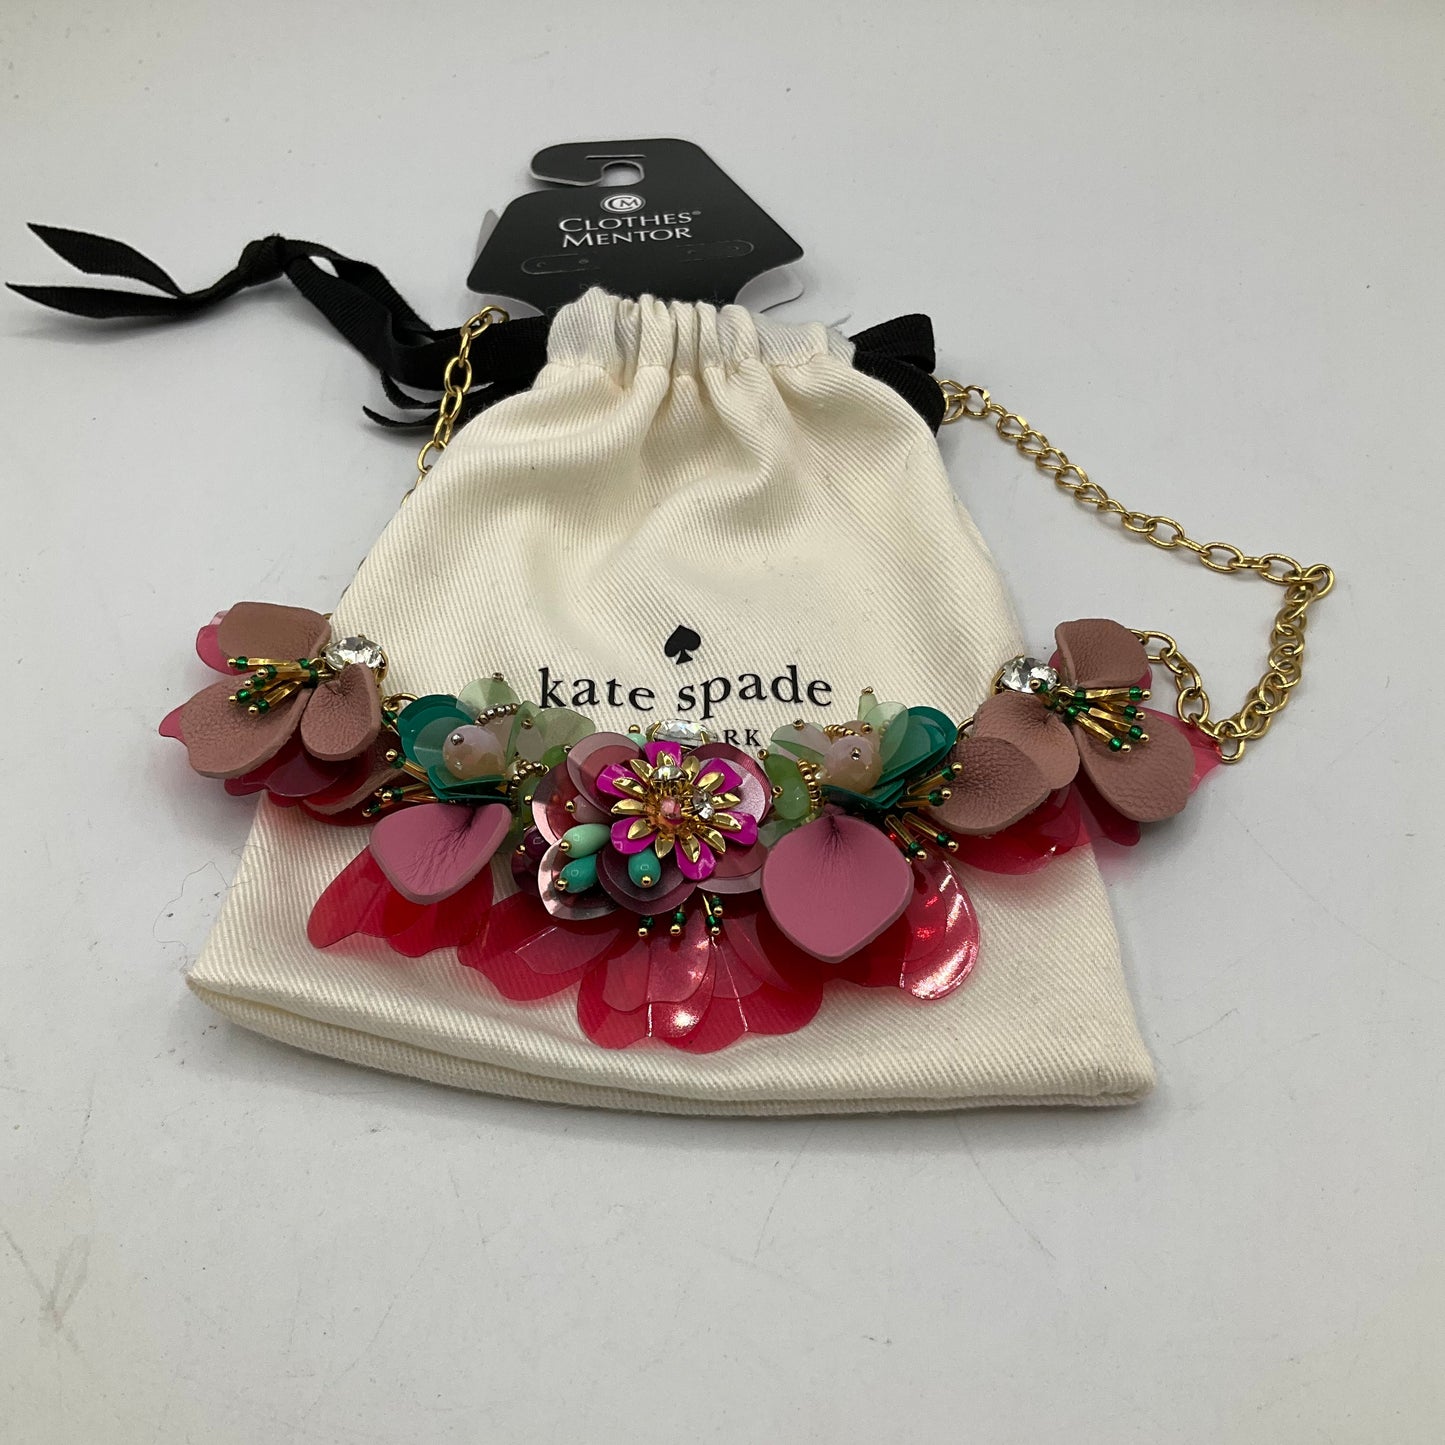 Necklace Statement Kate Spade